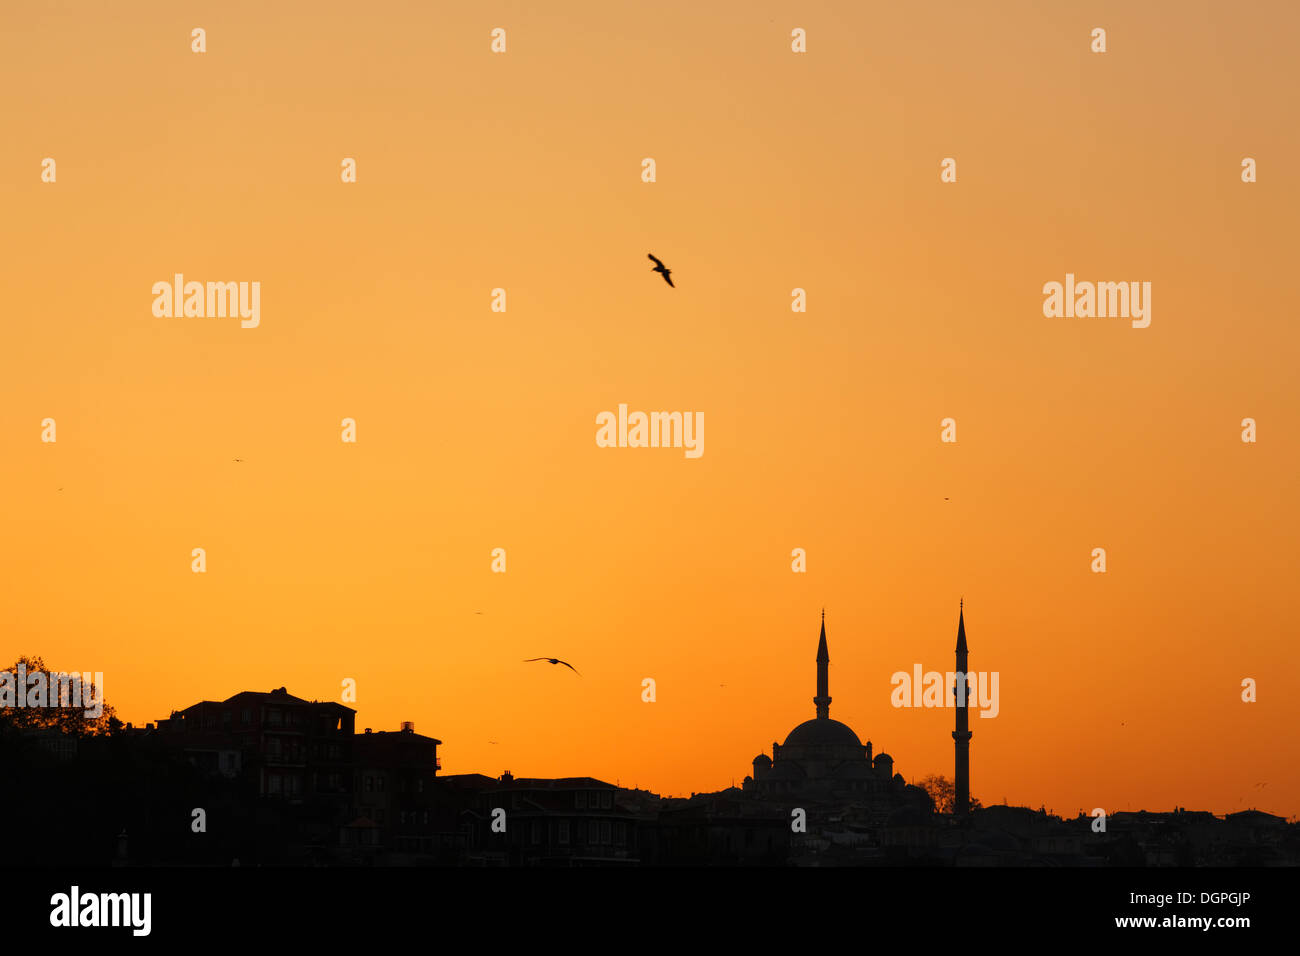 Fatih Mosque at sunset, Fatih district, Istanbul, Turkey, Europe Stock Photo